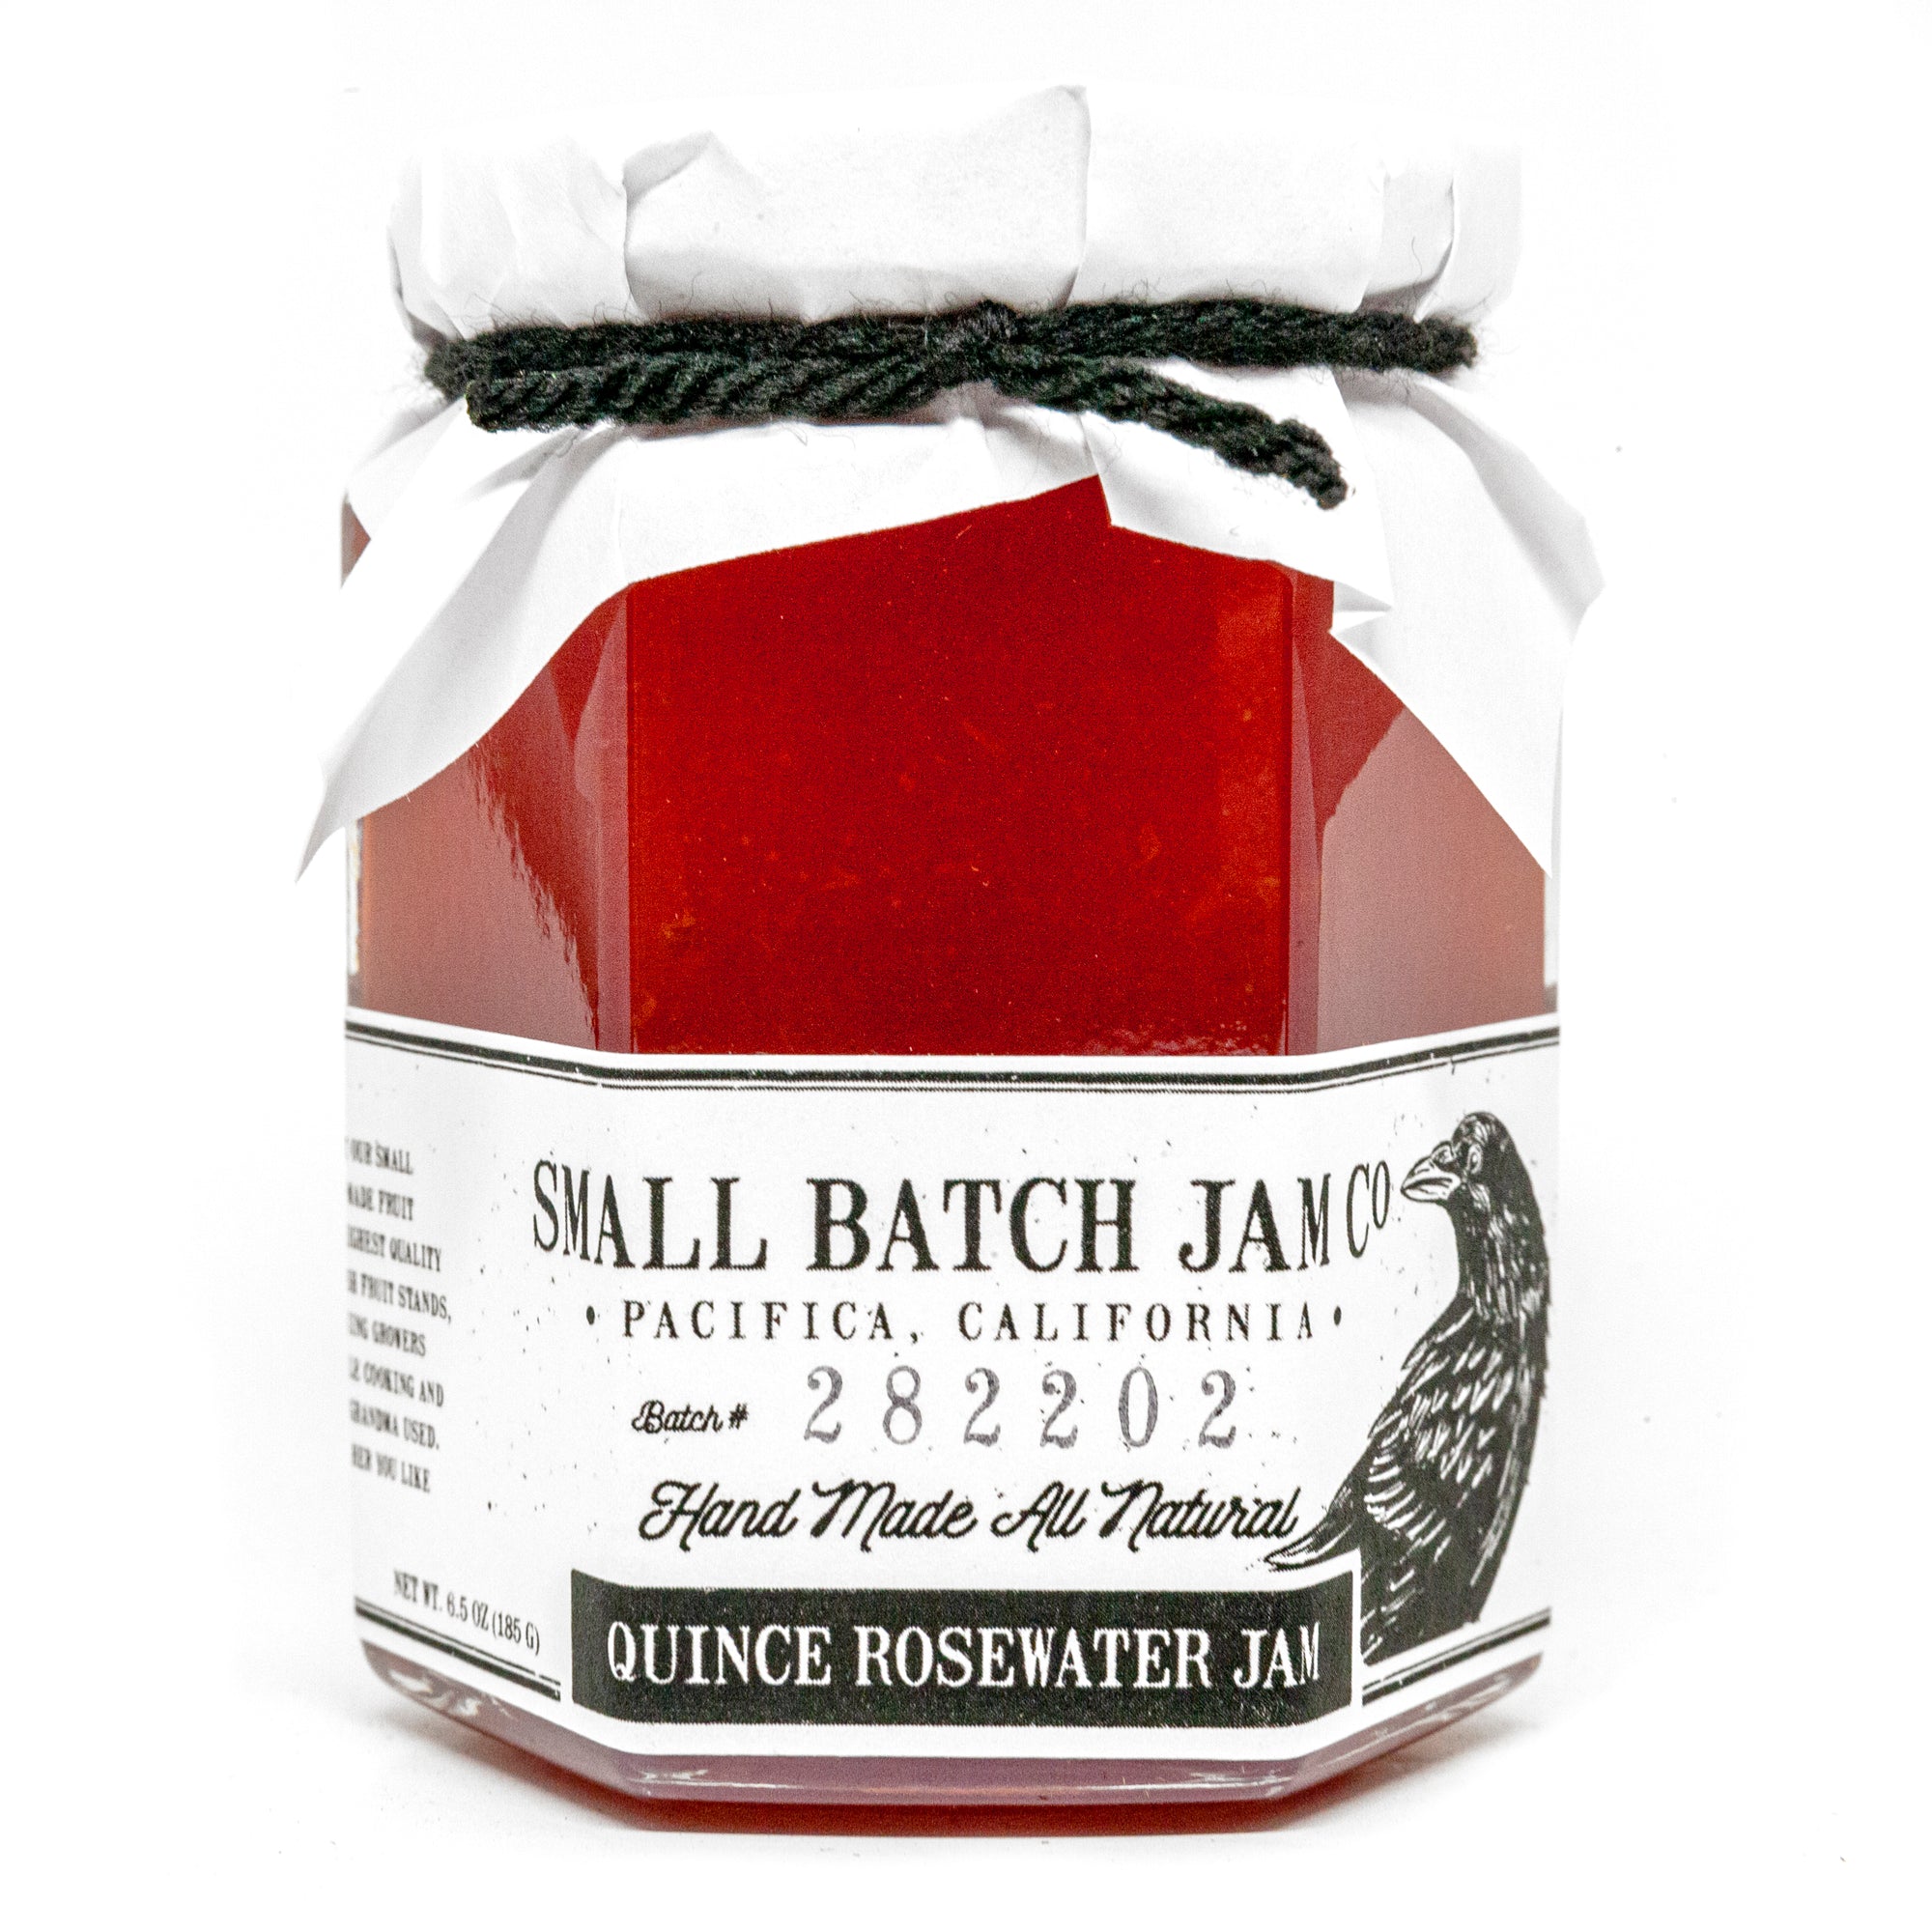 Quince Rosewater Jam